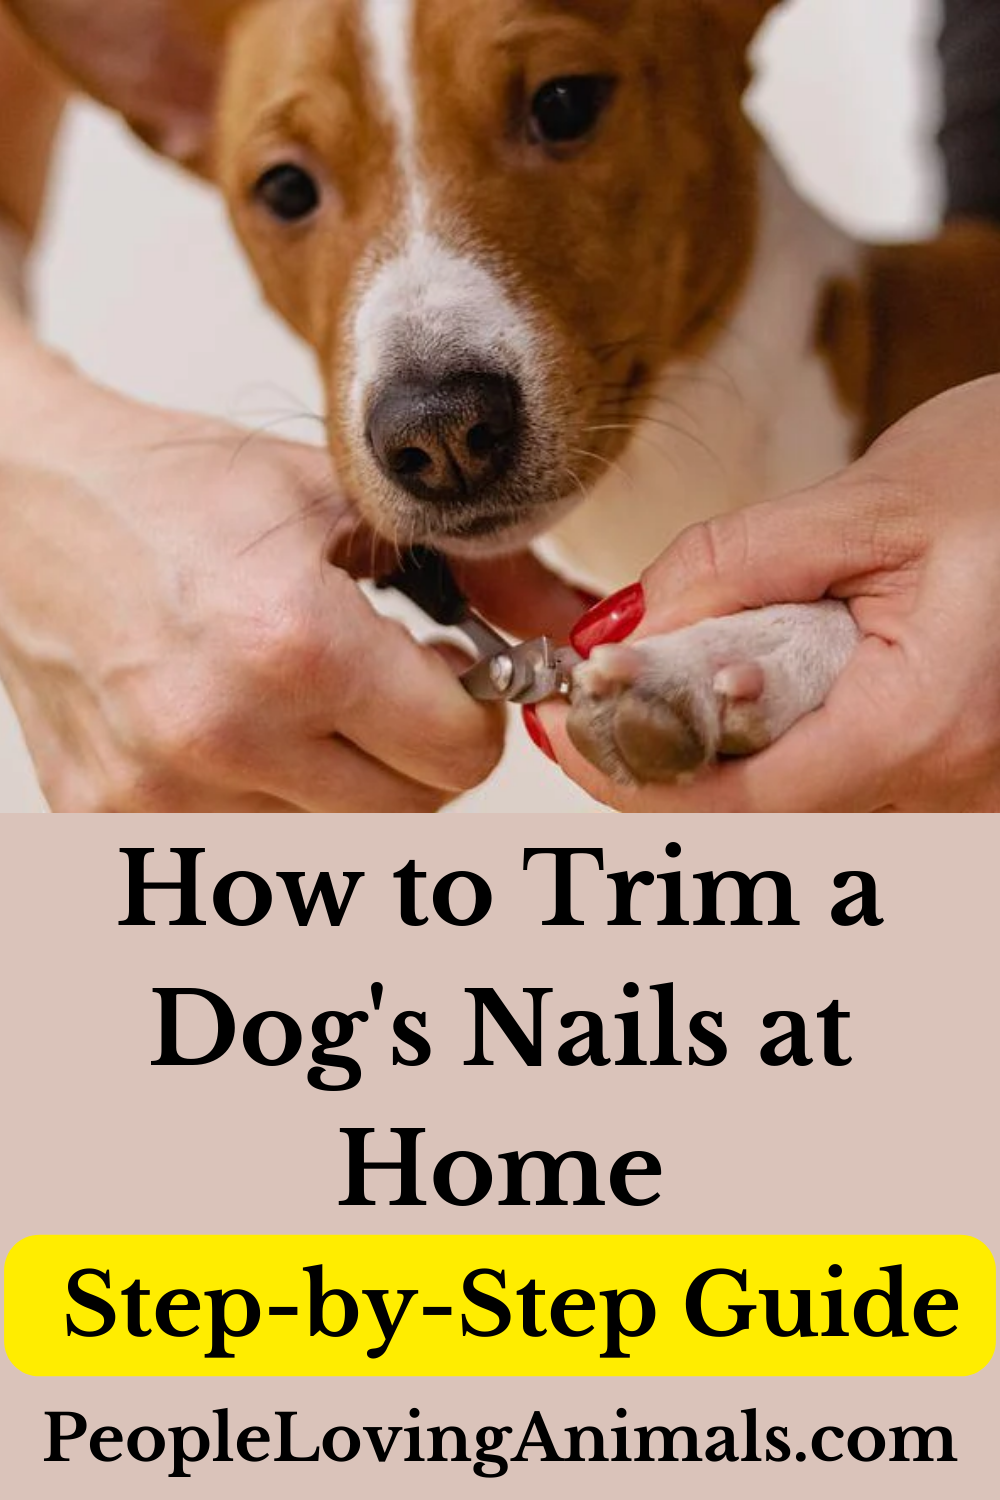 How to Trim a Dog’s Nails at Home - Step-by-Step Guide